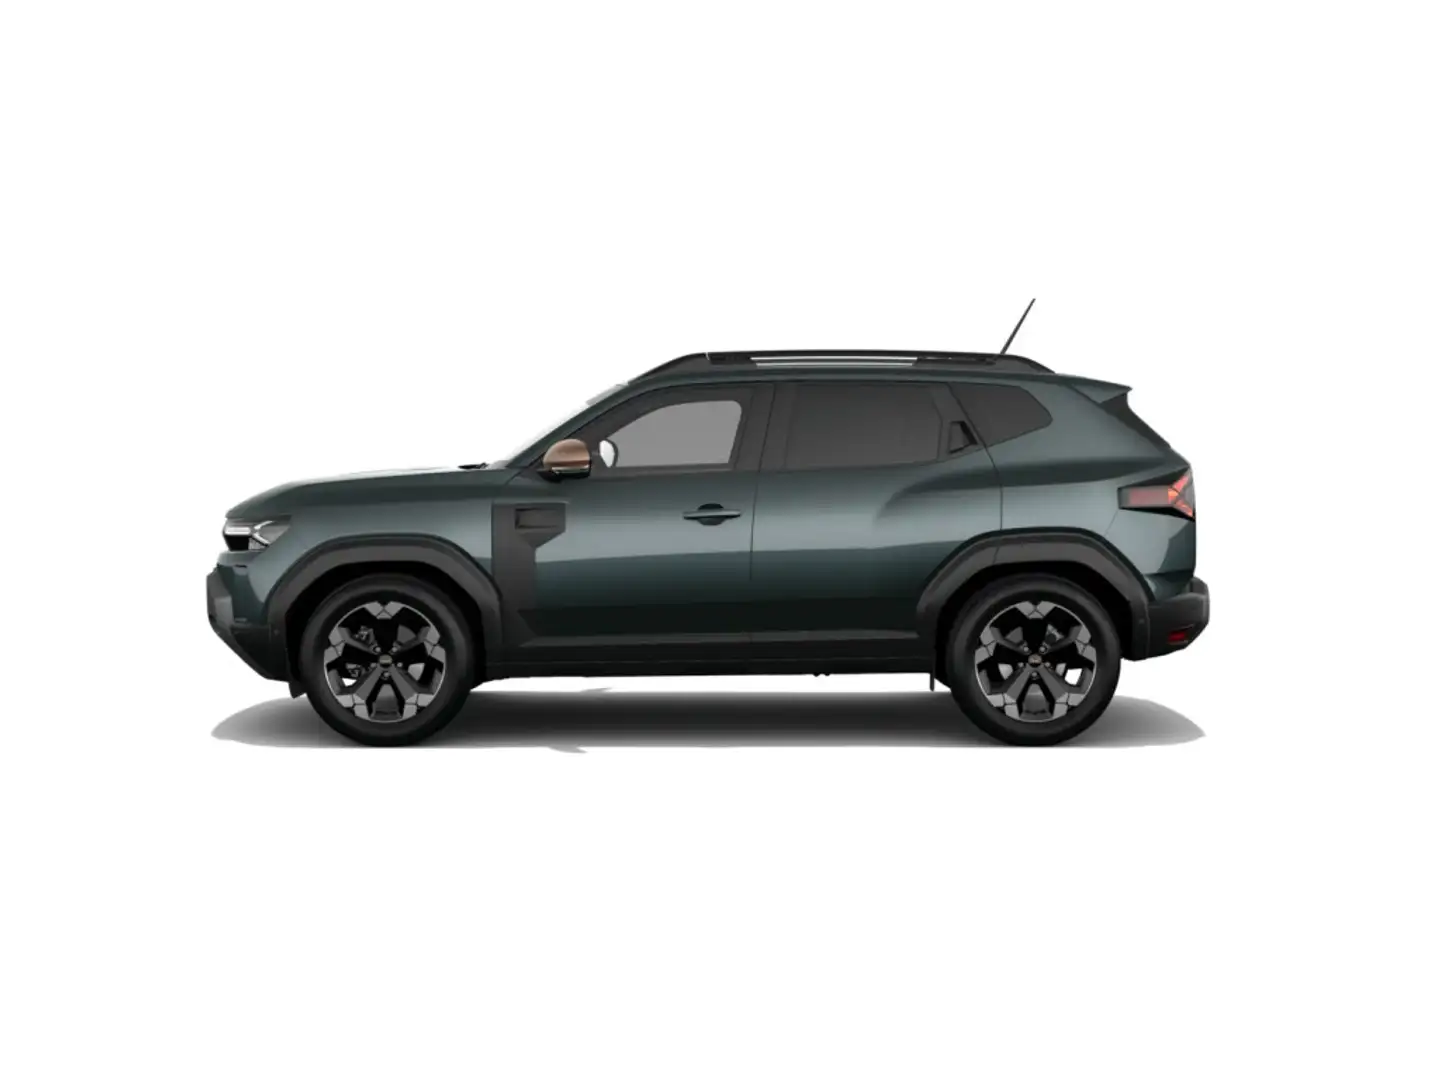 Dacia Duster 1.2 TCe Extreme 4x4 96kW 48v Verde - 2